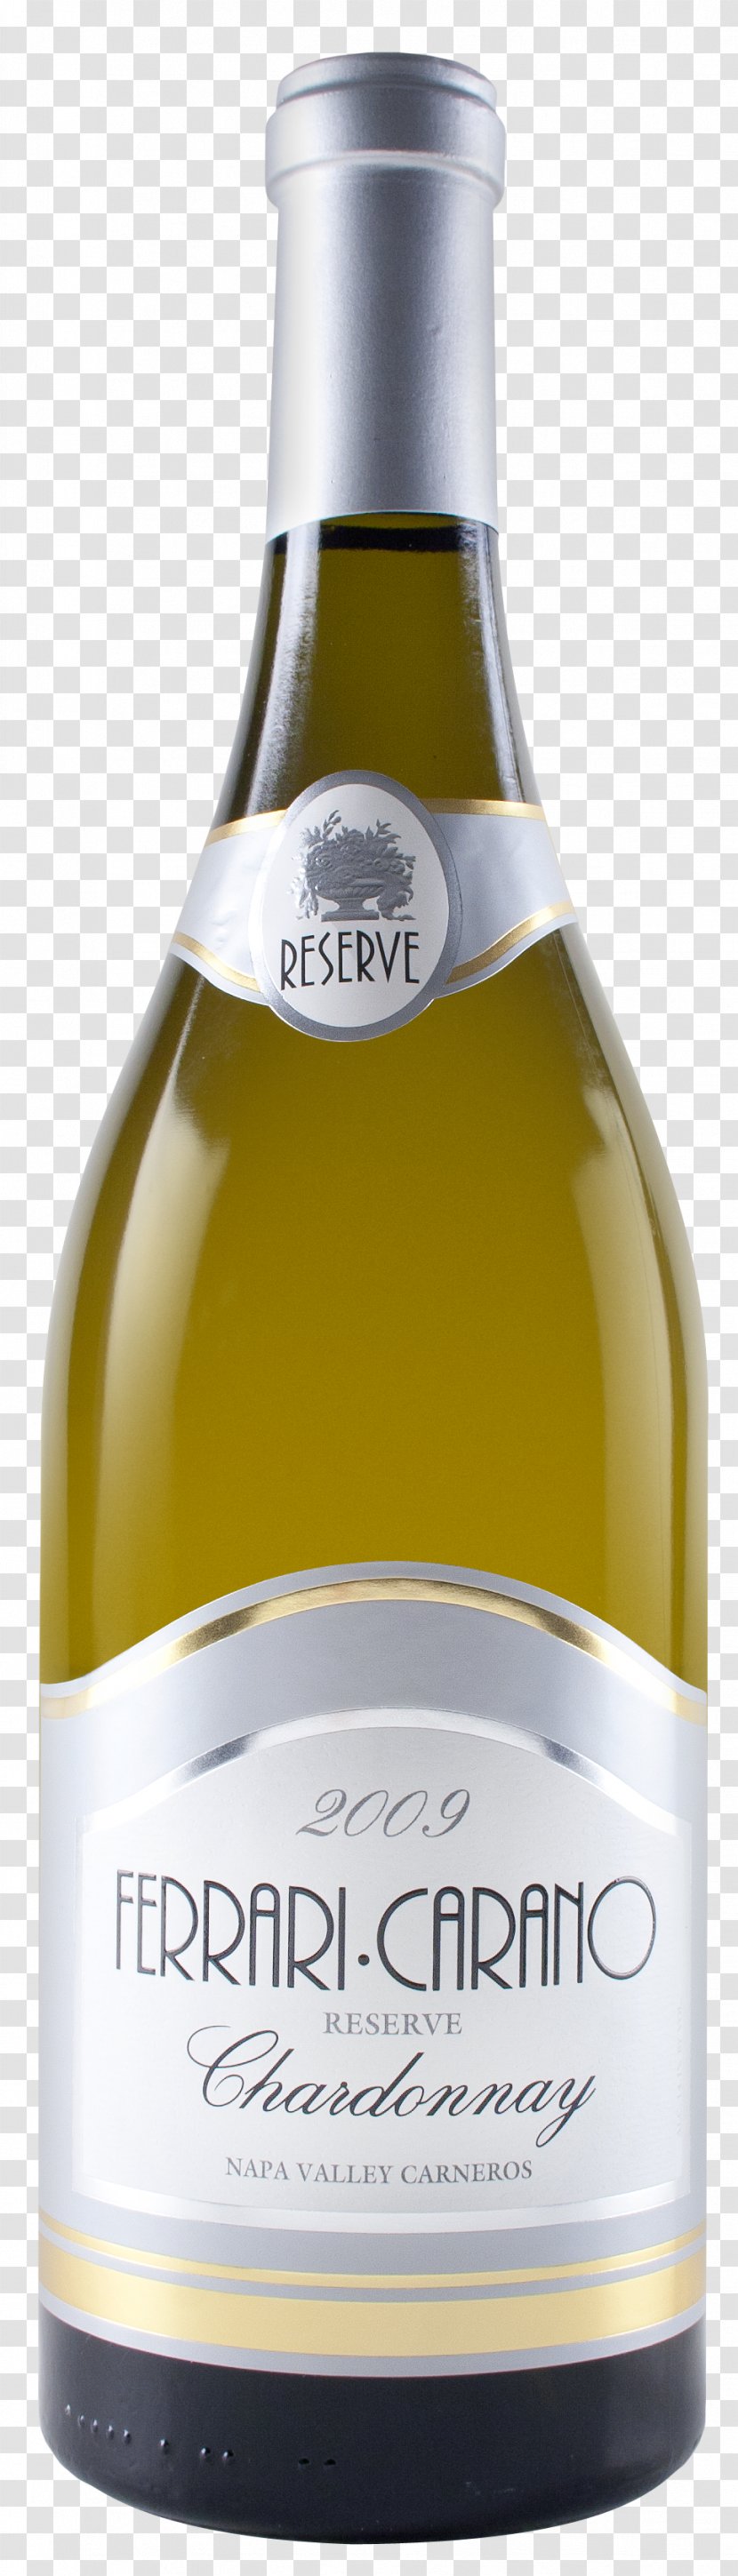 Liqueur Ferrari-Carano Vineyards And Winery White Wine Chardonnay - Bottle Transparent PNG